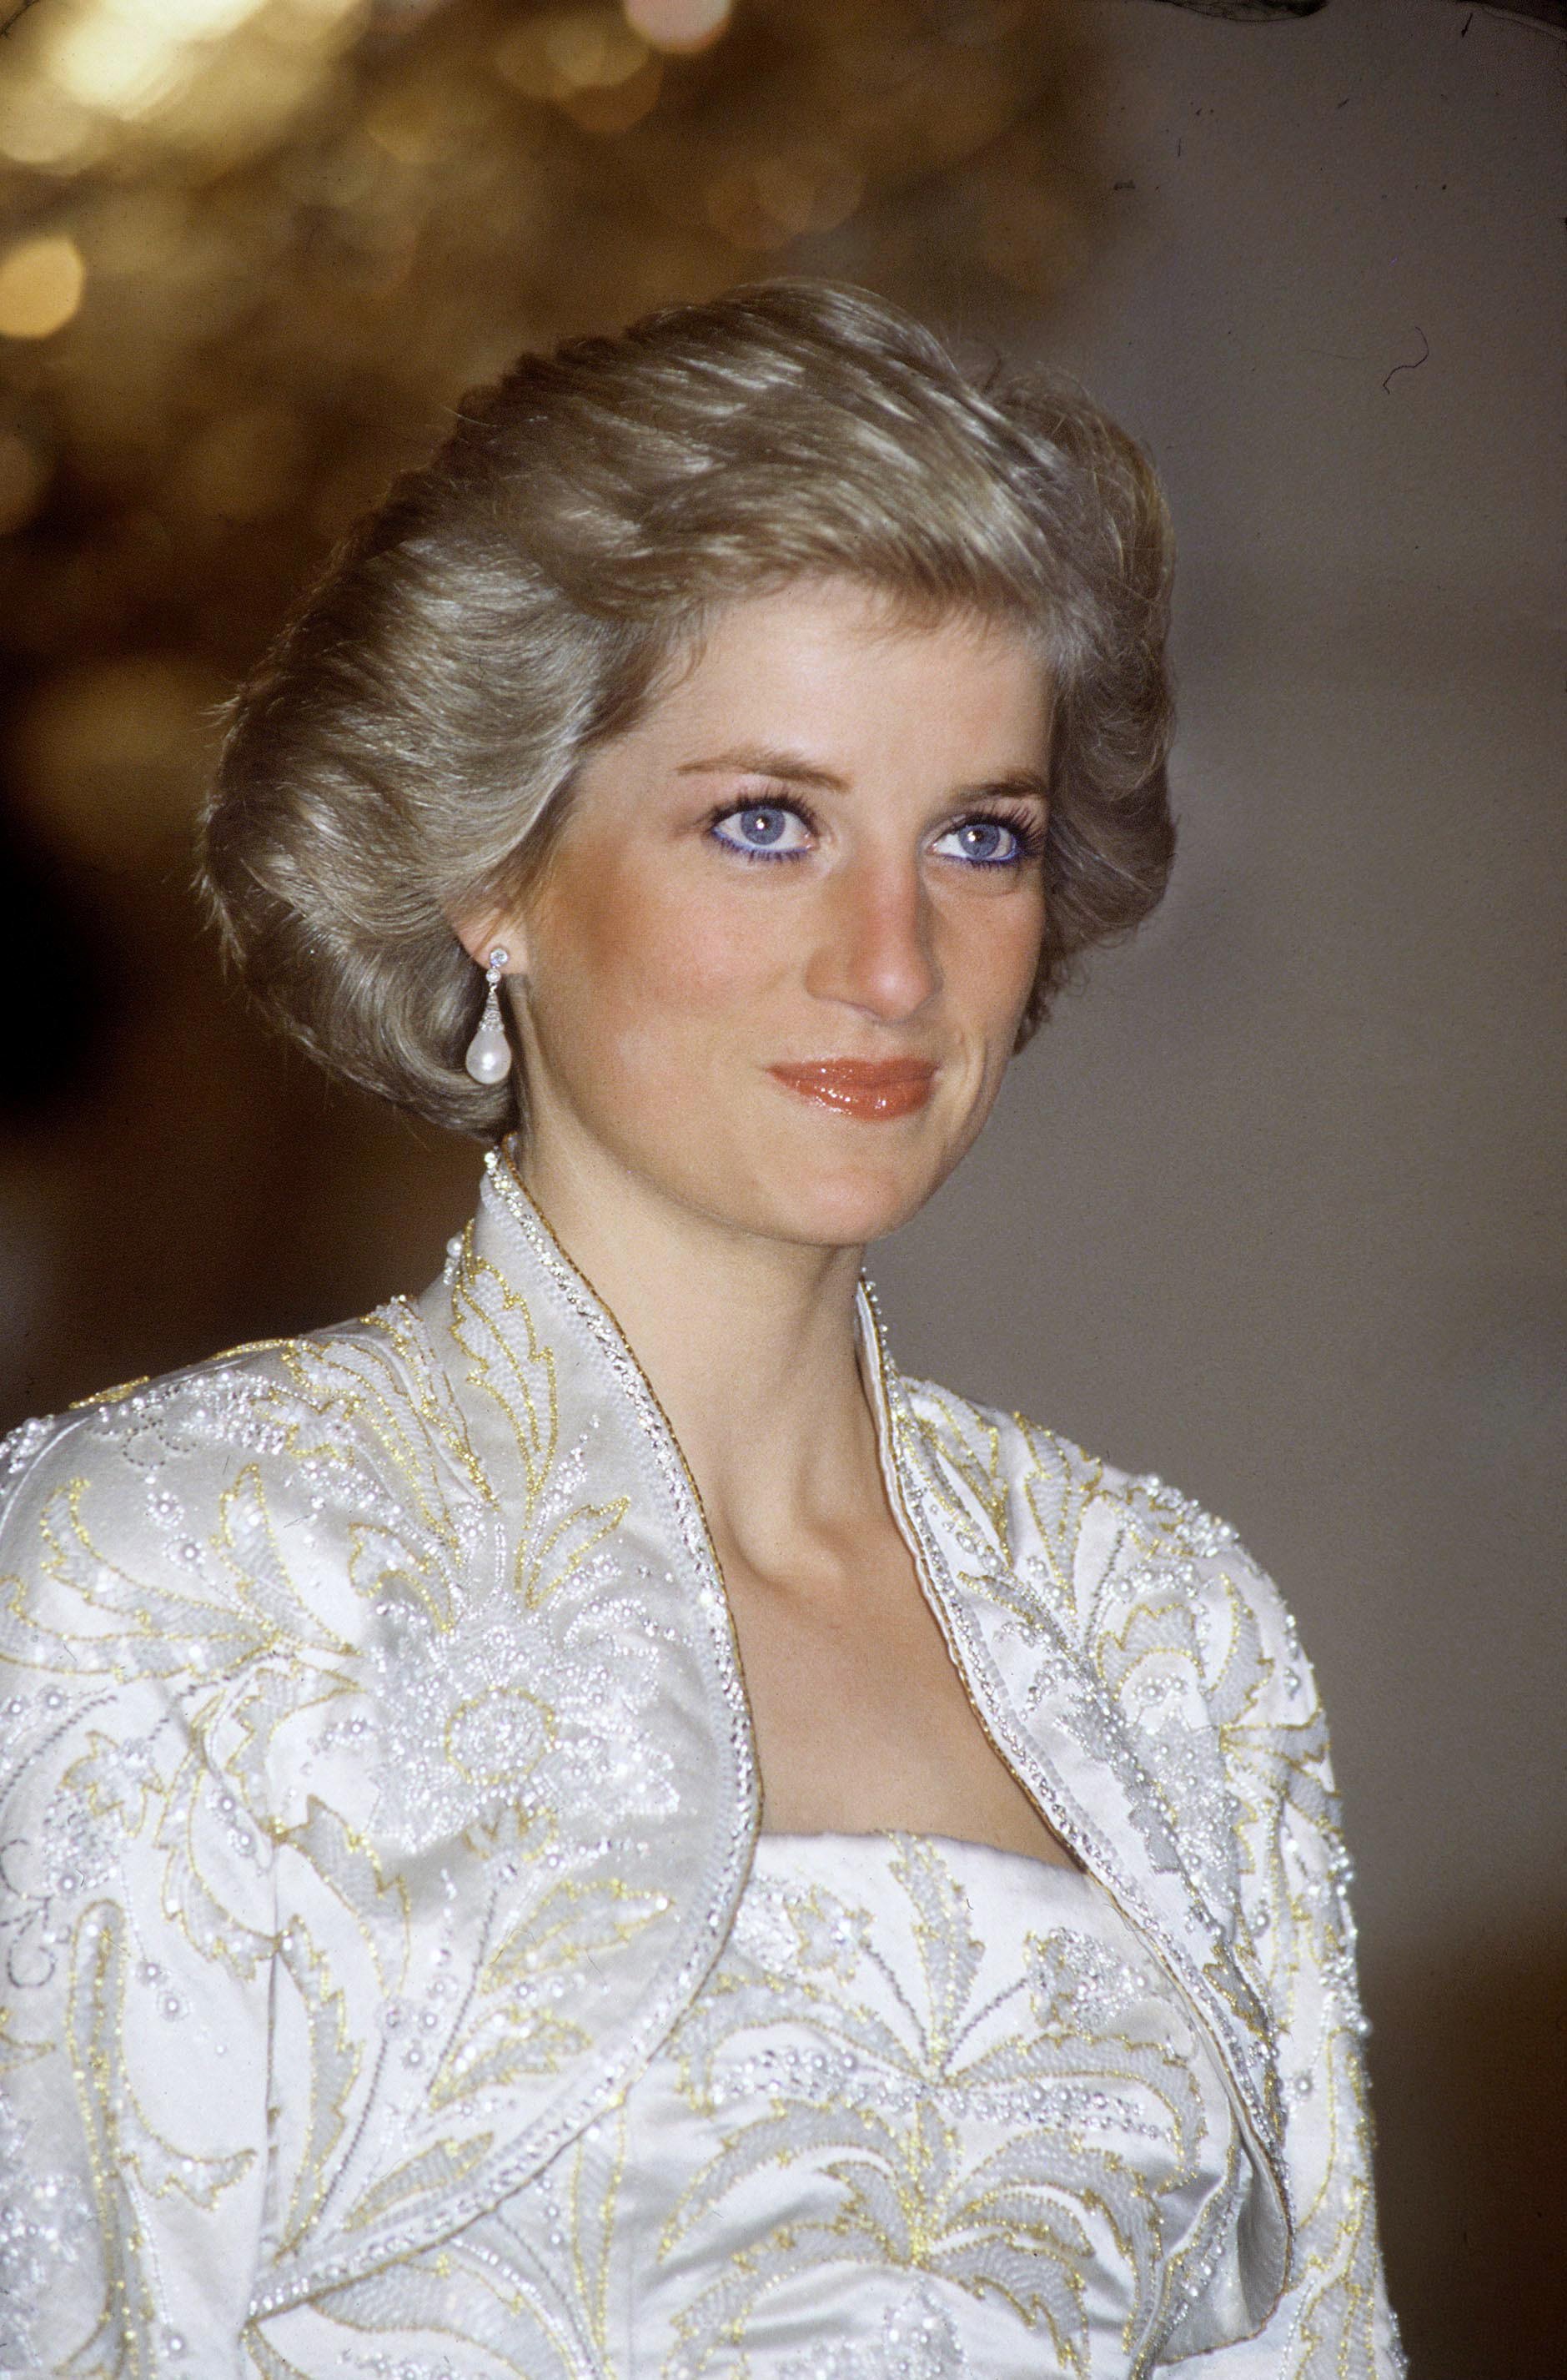 Princess Diana photographed at a state banquet at the Champs Elysee Palace in Paris, France ┃Source: Getty Images